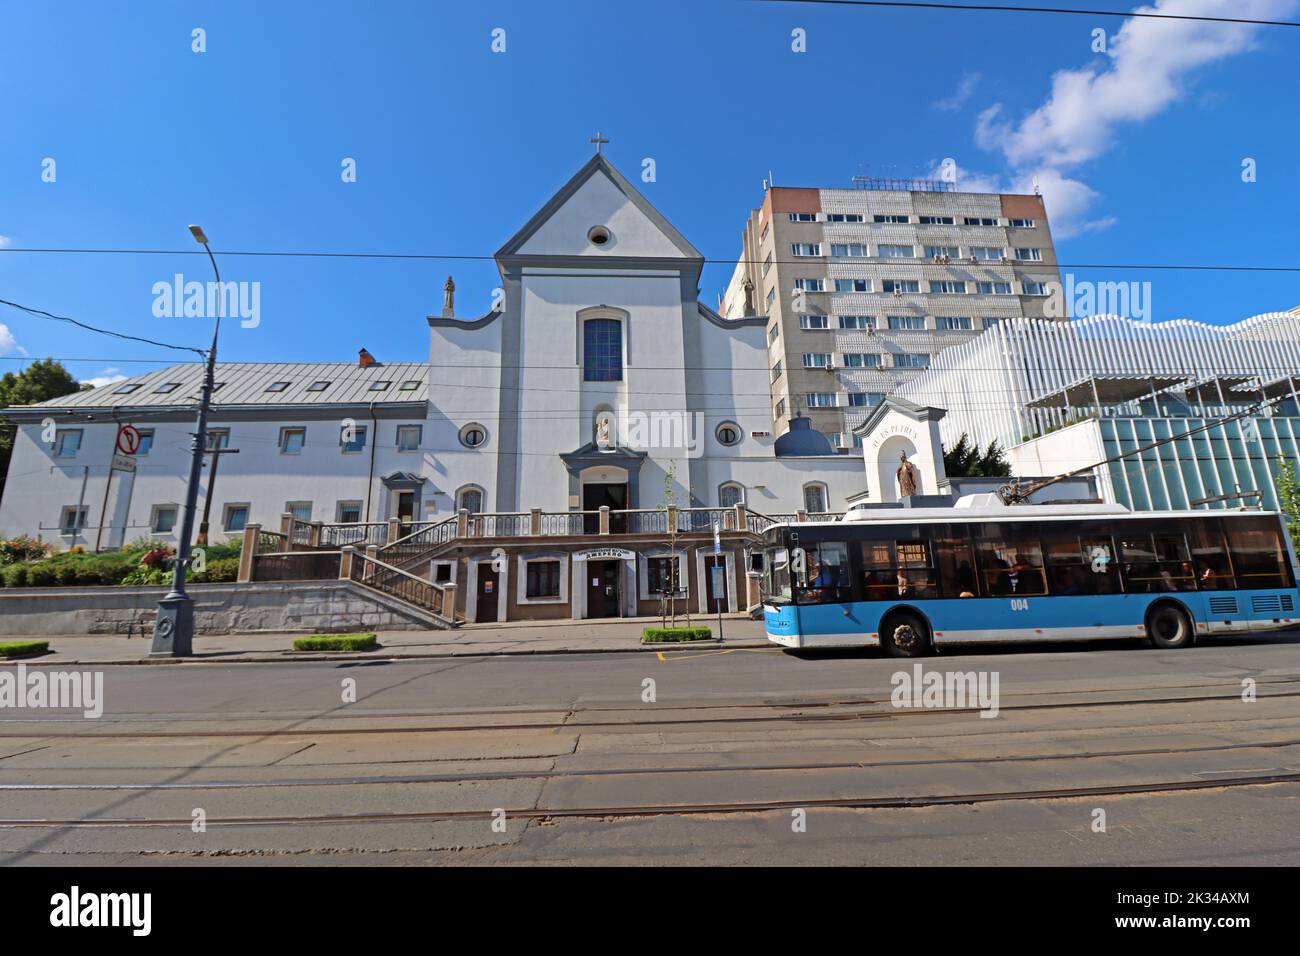 Vinnytsia, Ukraine - August 07, 2022: View of the Capuchin Church of the Blessed Virgin Mary of the Angels - built in Vinnytsia in 1746 in an unusual Stock Photo